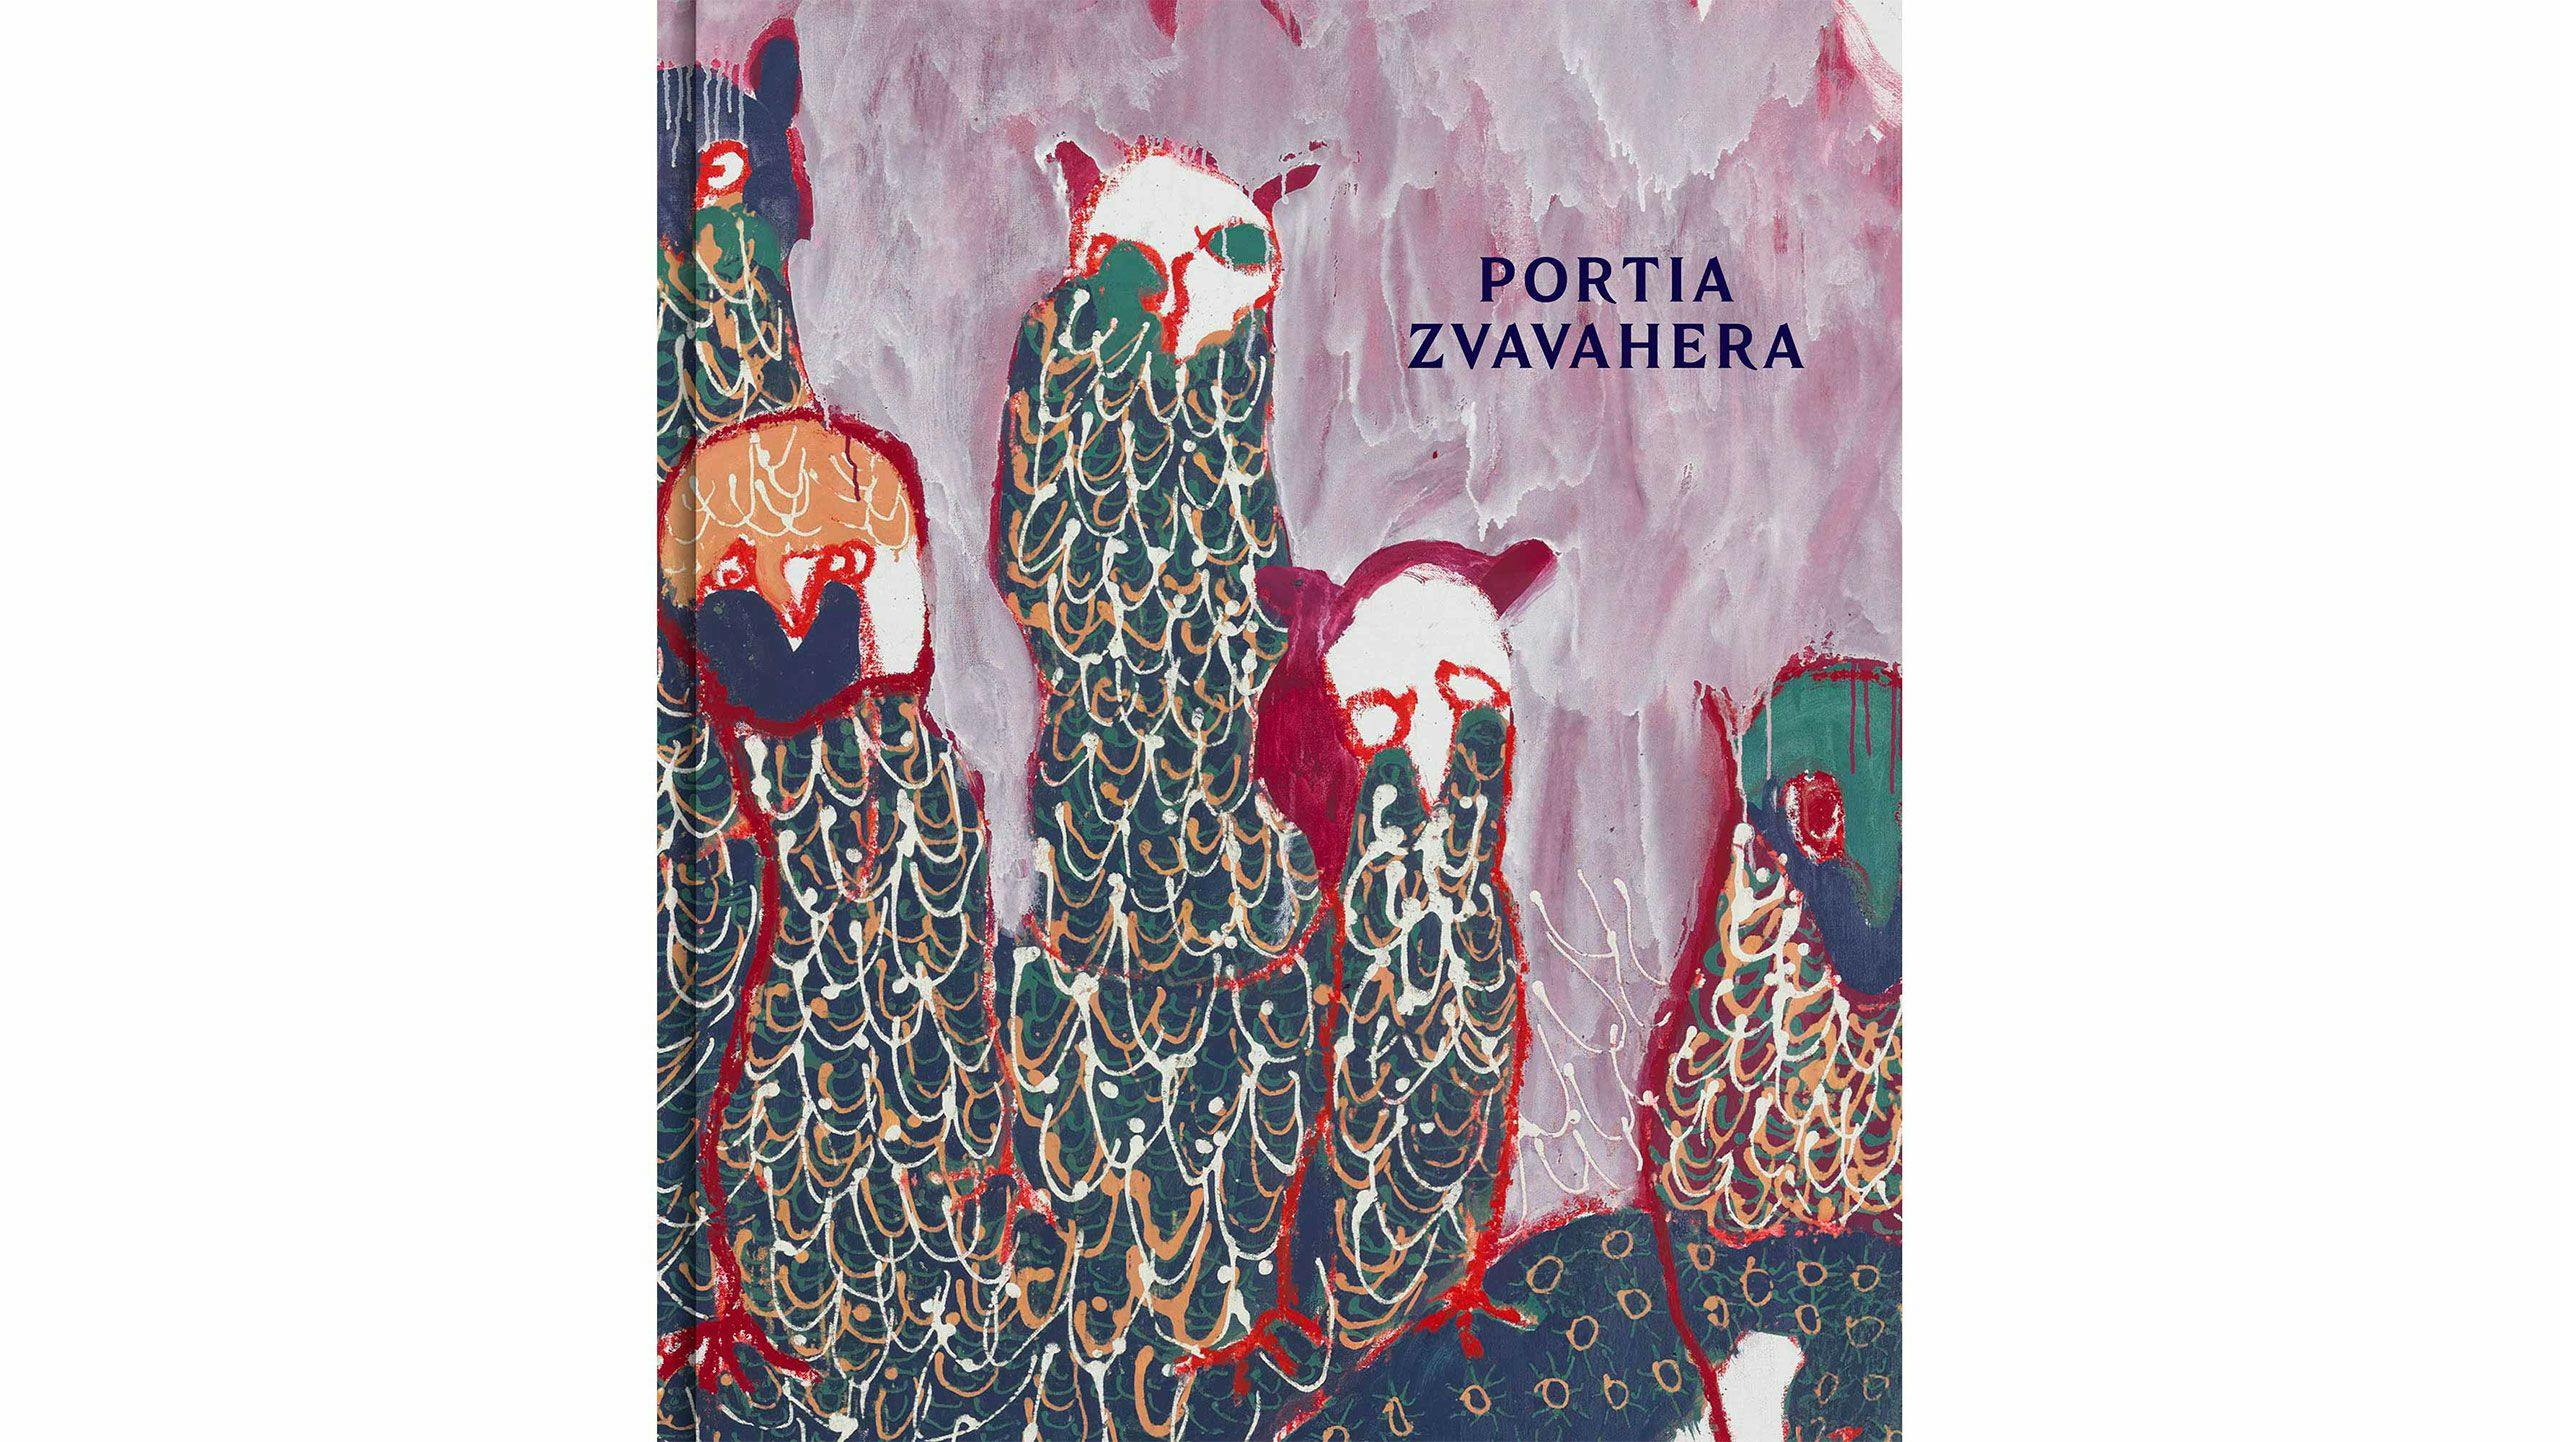 Cover of a book titled Portia Zvavahera, published by David Zwirner Books in 2022.